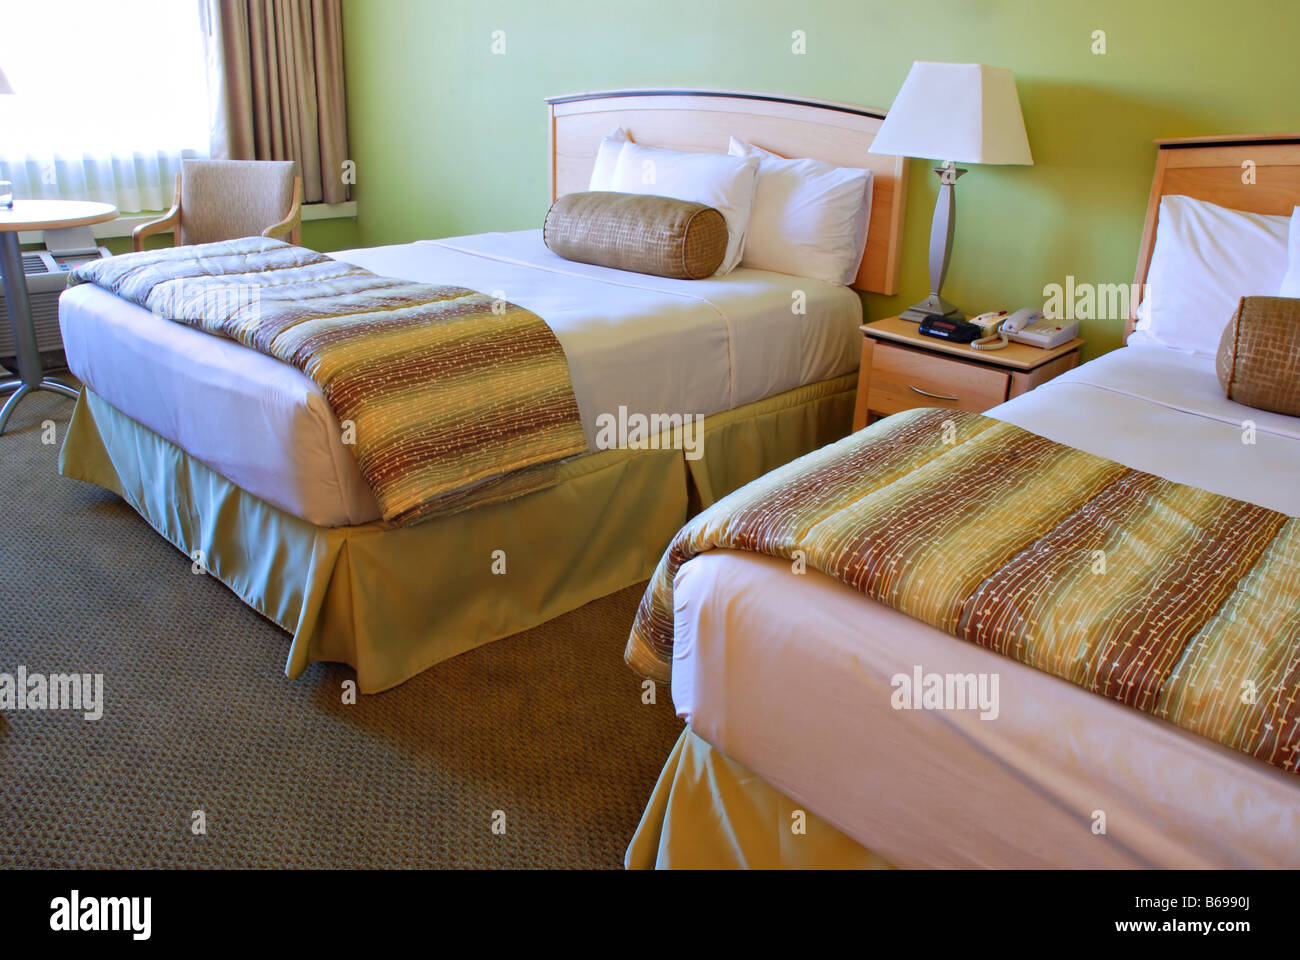 Bed and pillows in a green hotel room Stock Photo